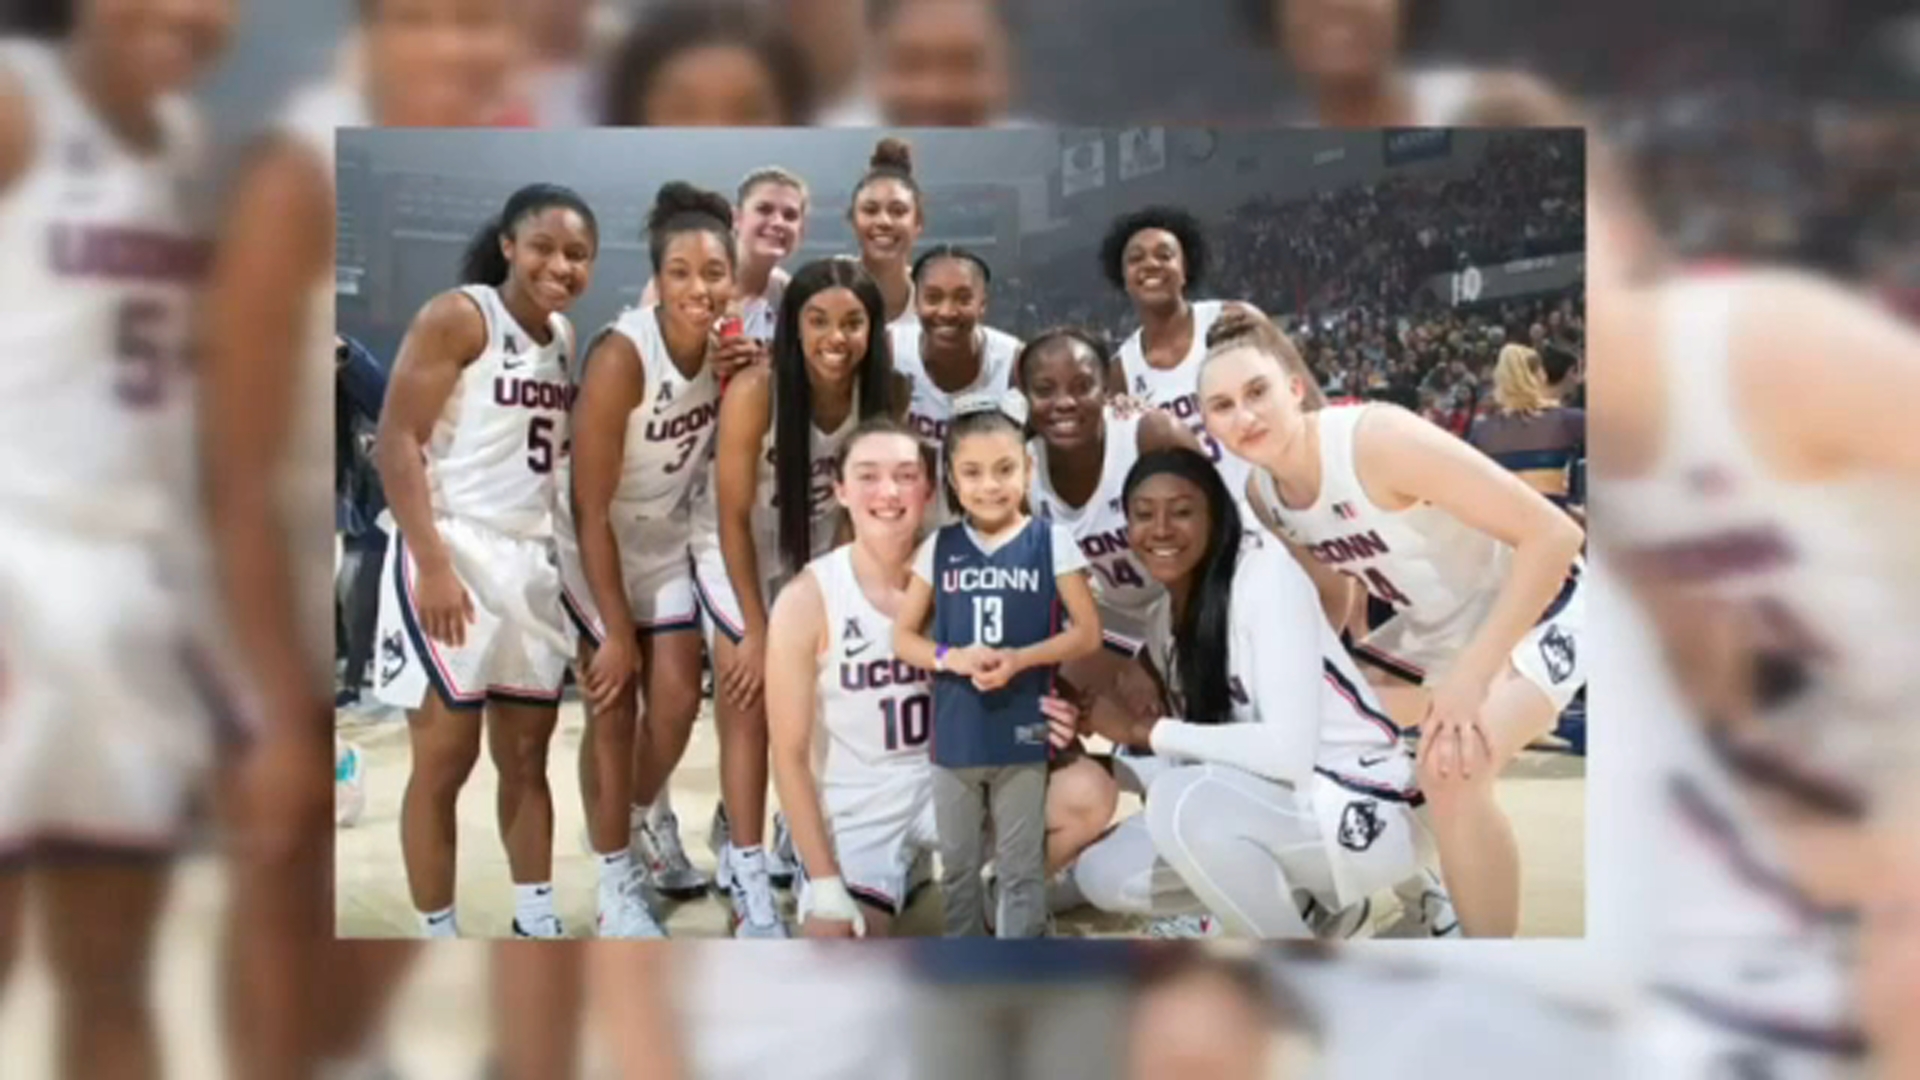 NCAA Tournament 2022 UConn womens team surprises young superfan with trip to watch them in Final Four